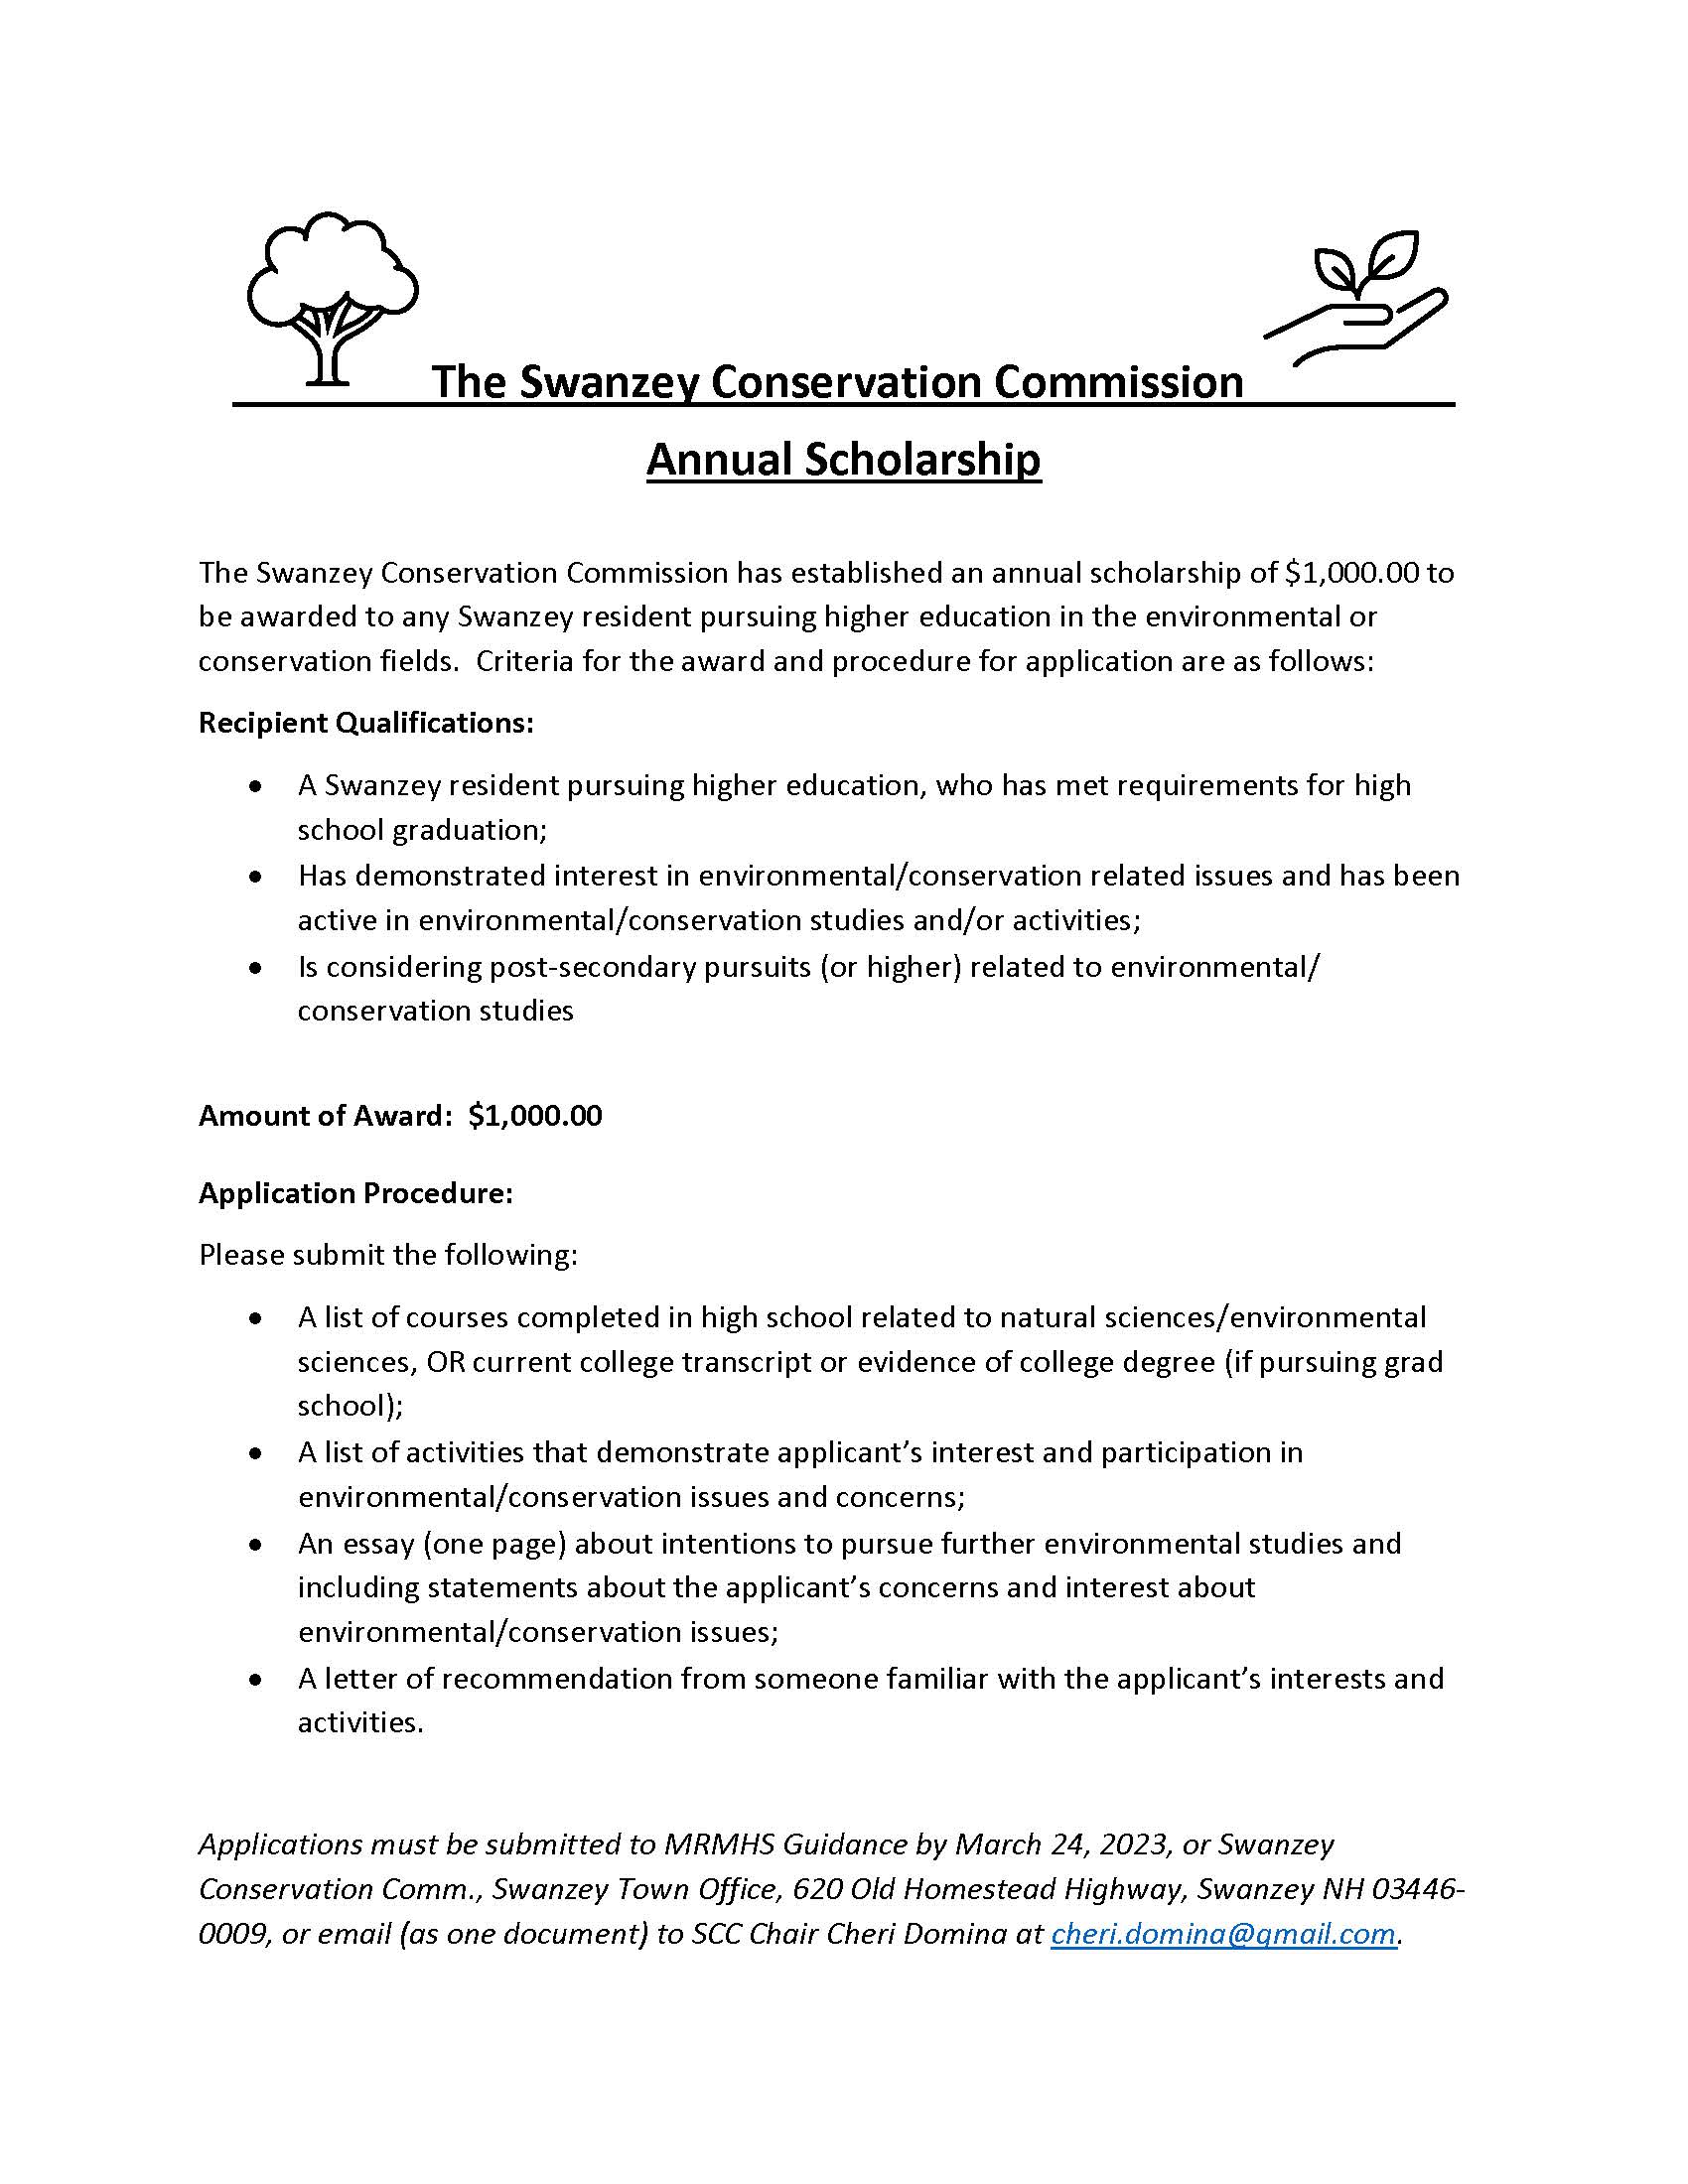 Swanzey Conservation Commission Annual Scholarship